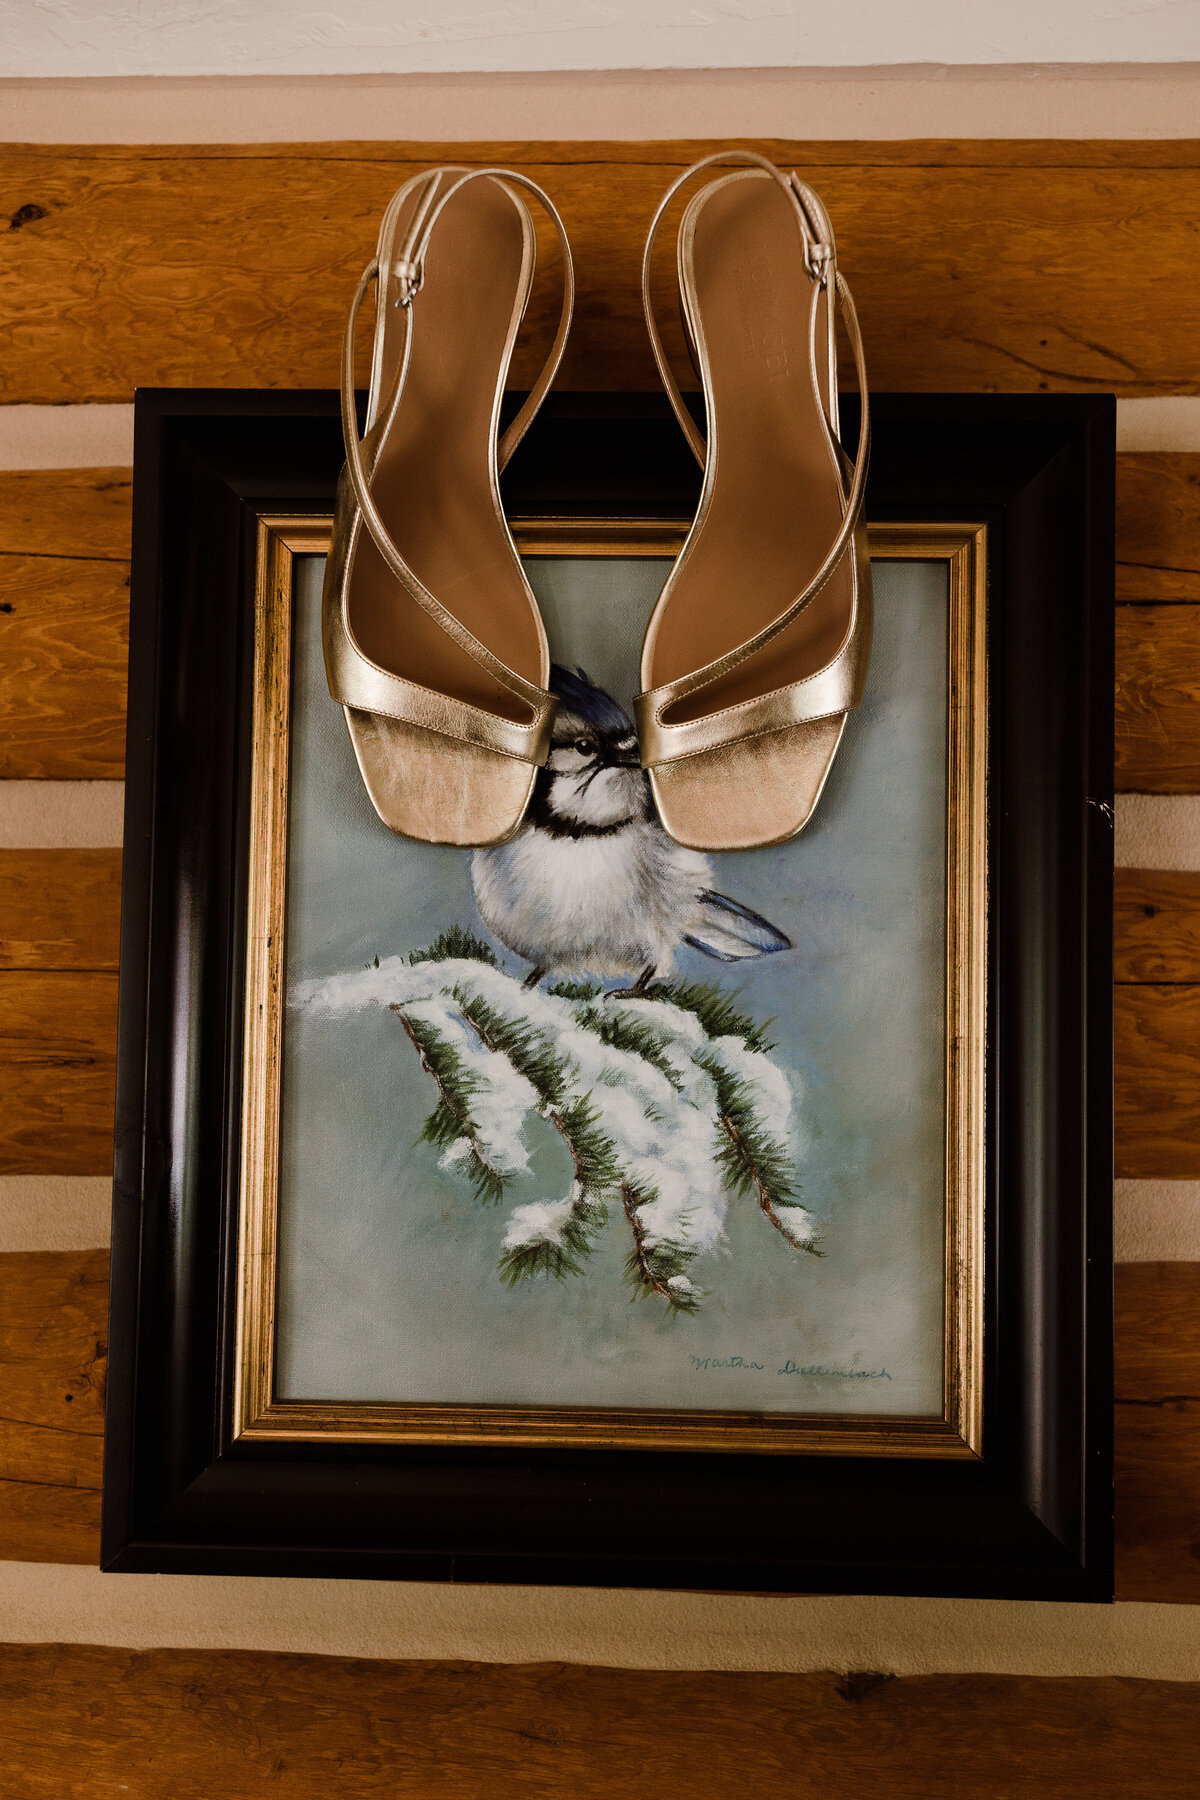 Gold shoes on a framed print at Dallenbach Ranch Colorado Wedding